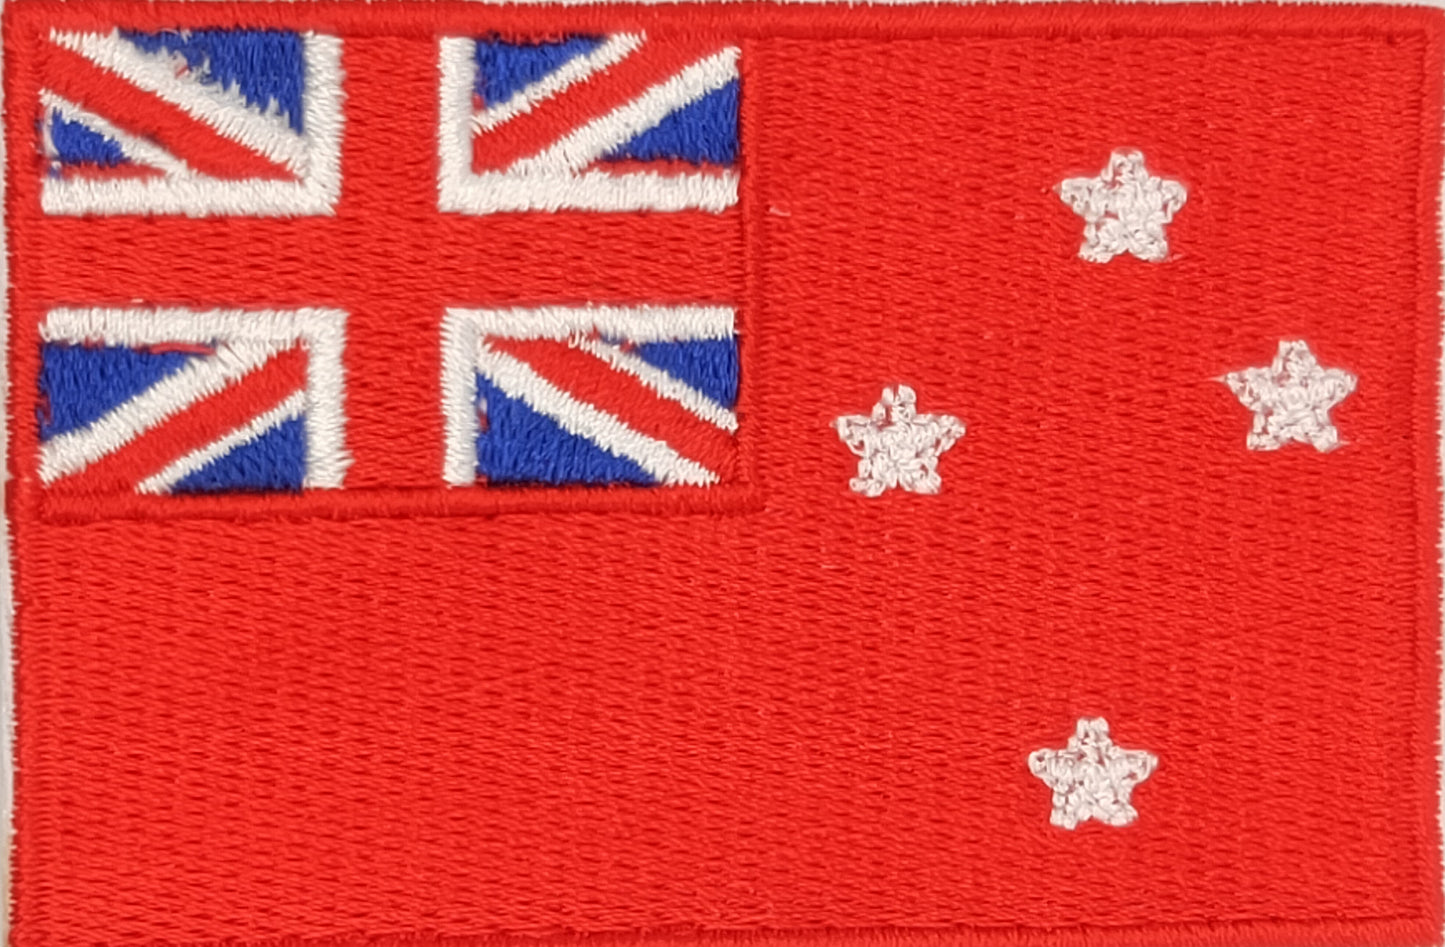 Flag Patch of NZ - Red Ensign